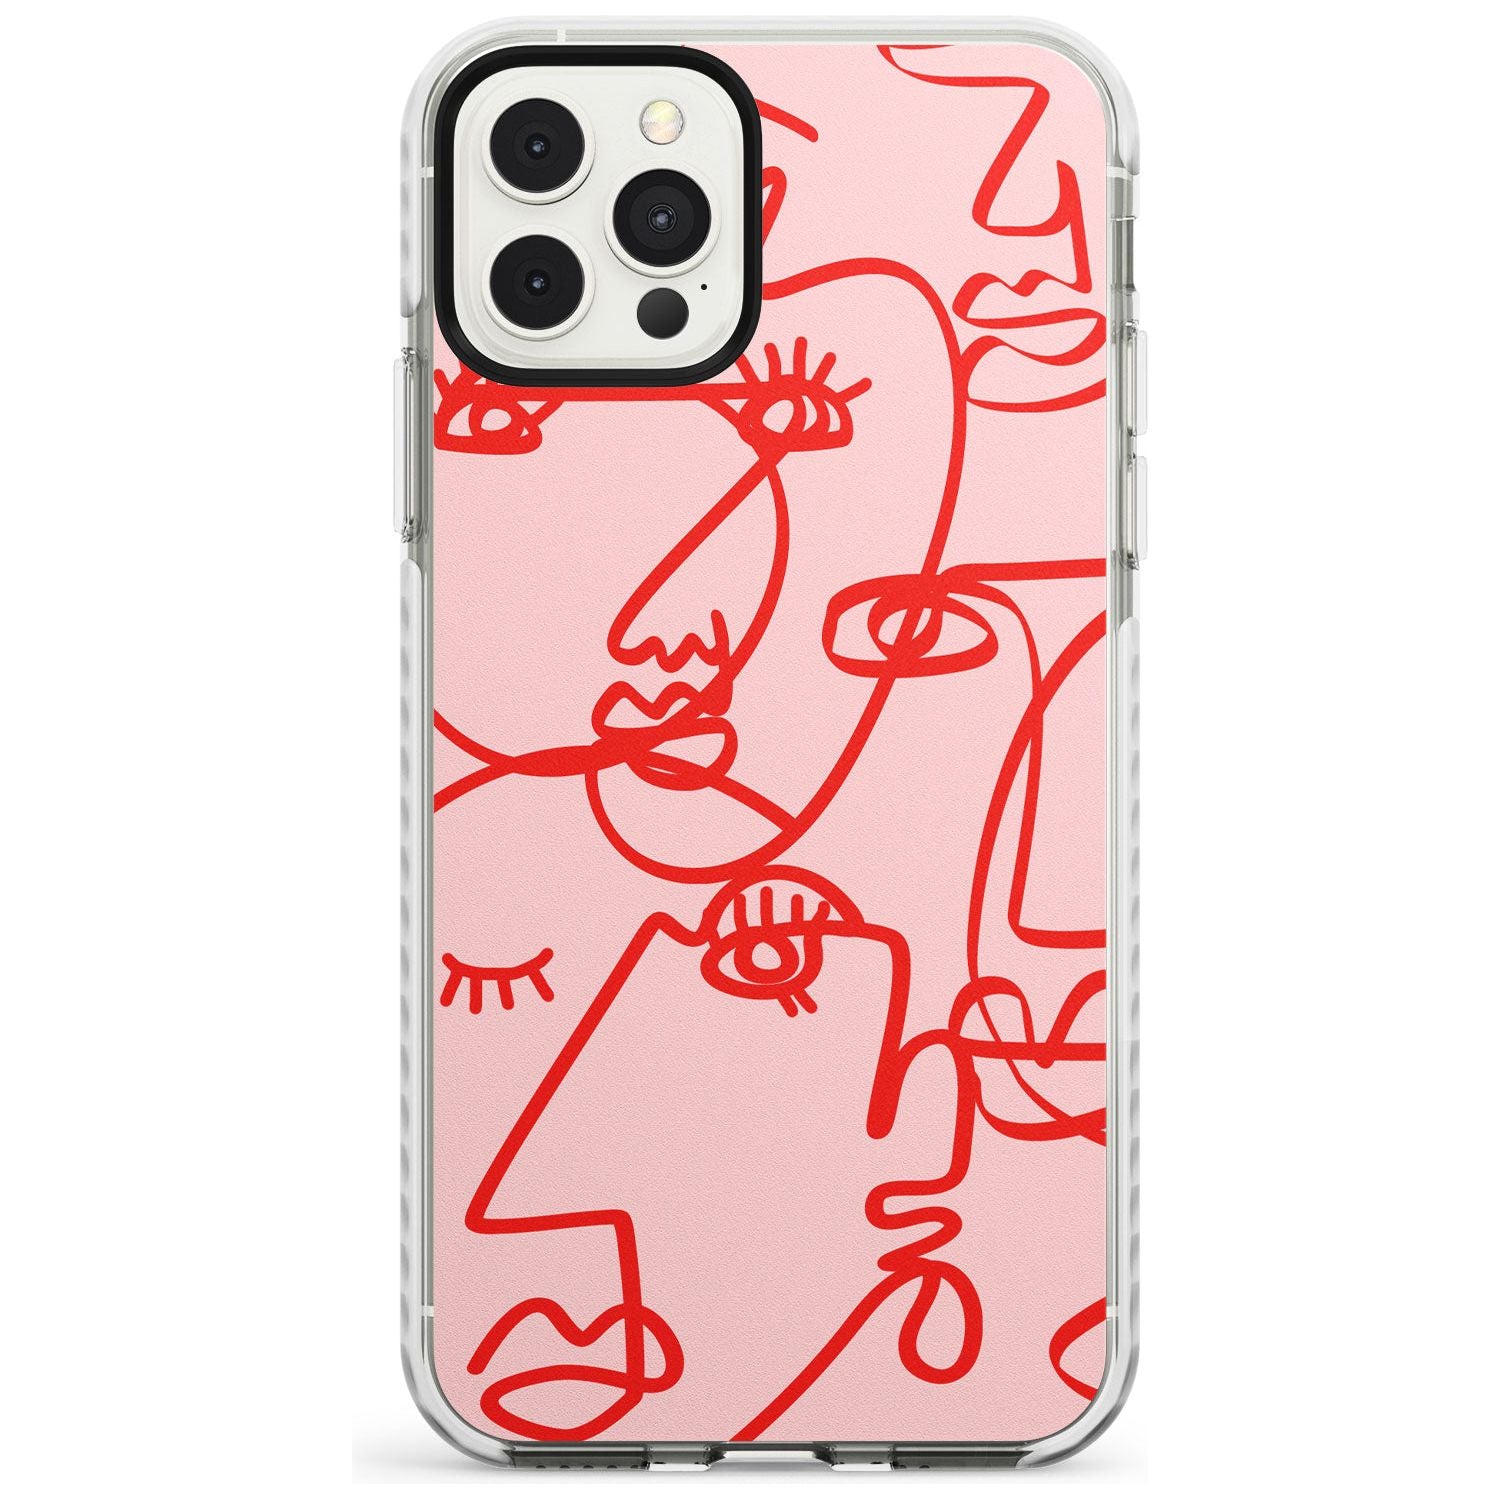 Continuous Line Faces: Red on Pink Slim TPU Phone Case for iPhone 11 Pro Max